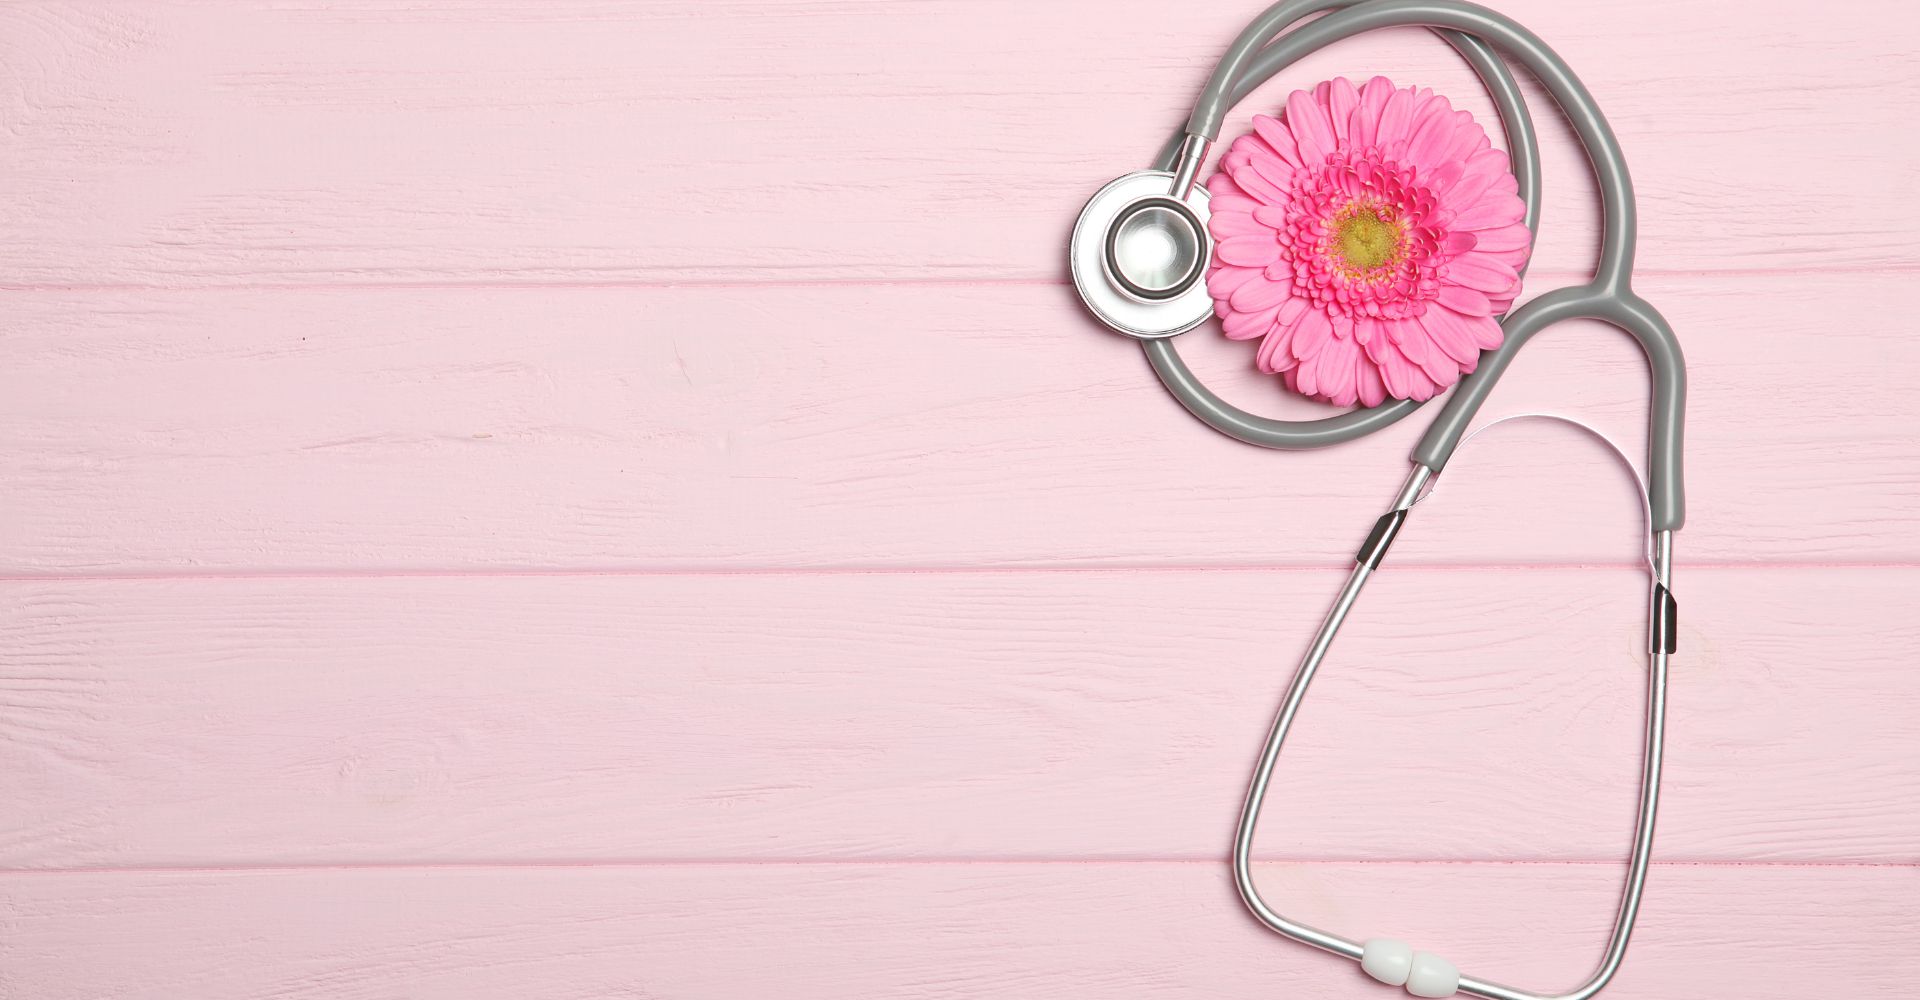 A pink background with a flower and a stethoscope.